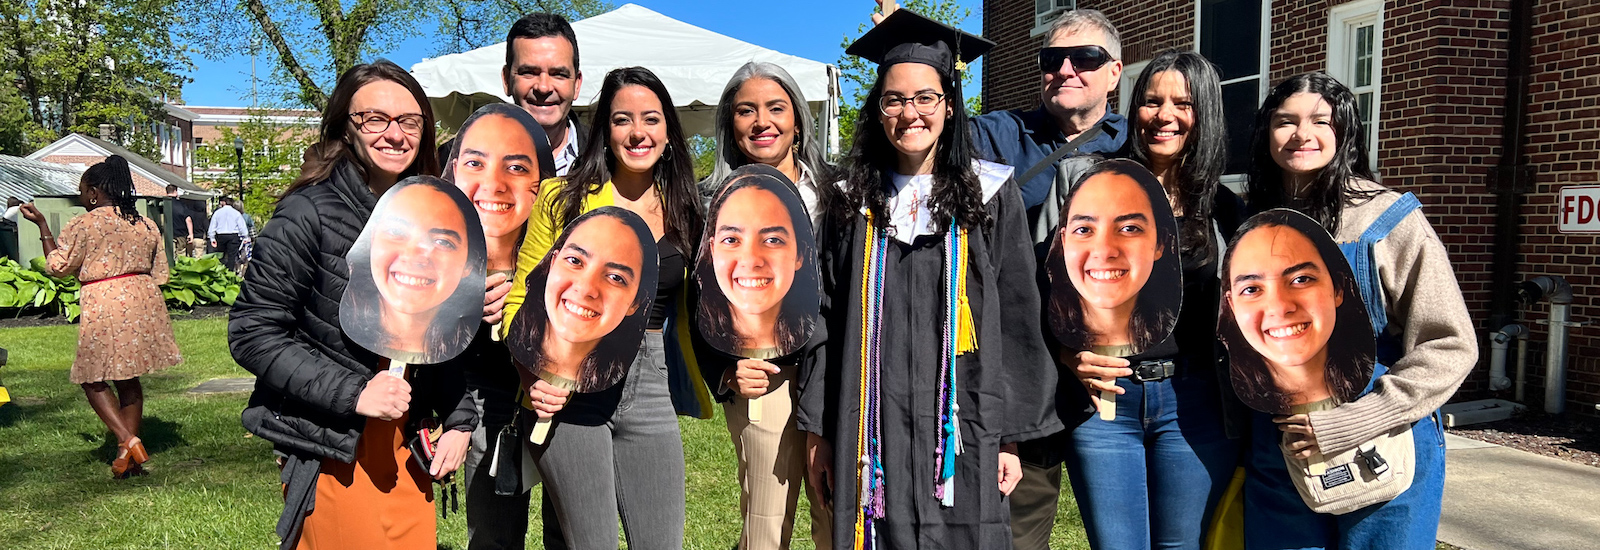 Danielly celebrates commencement with her family.